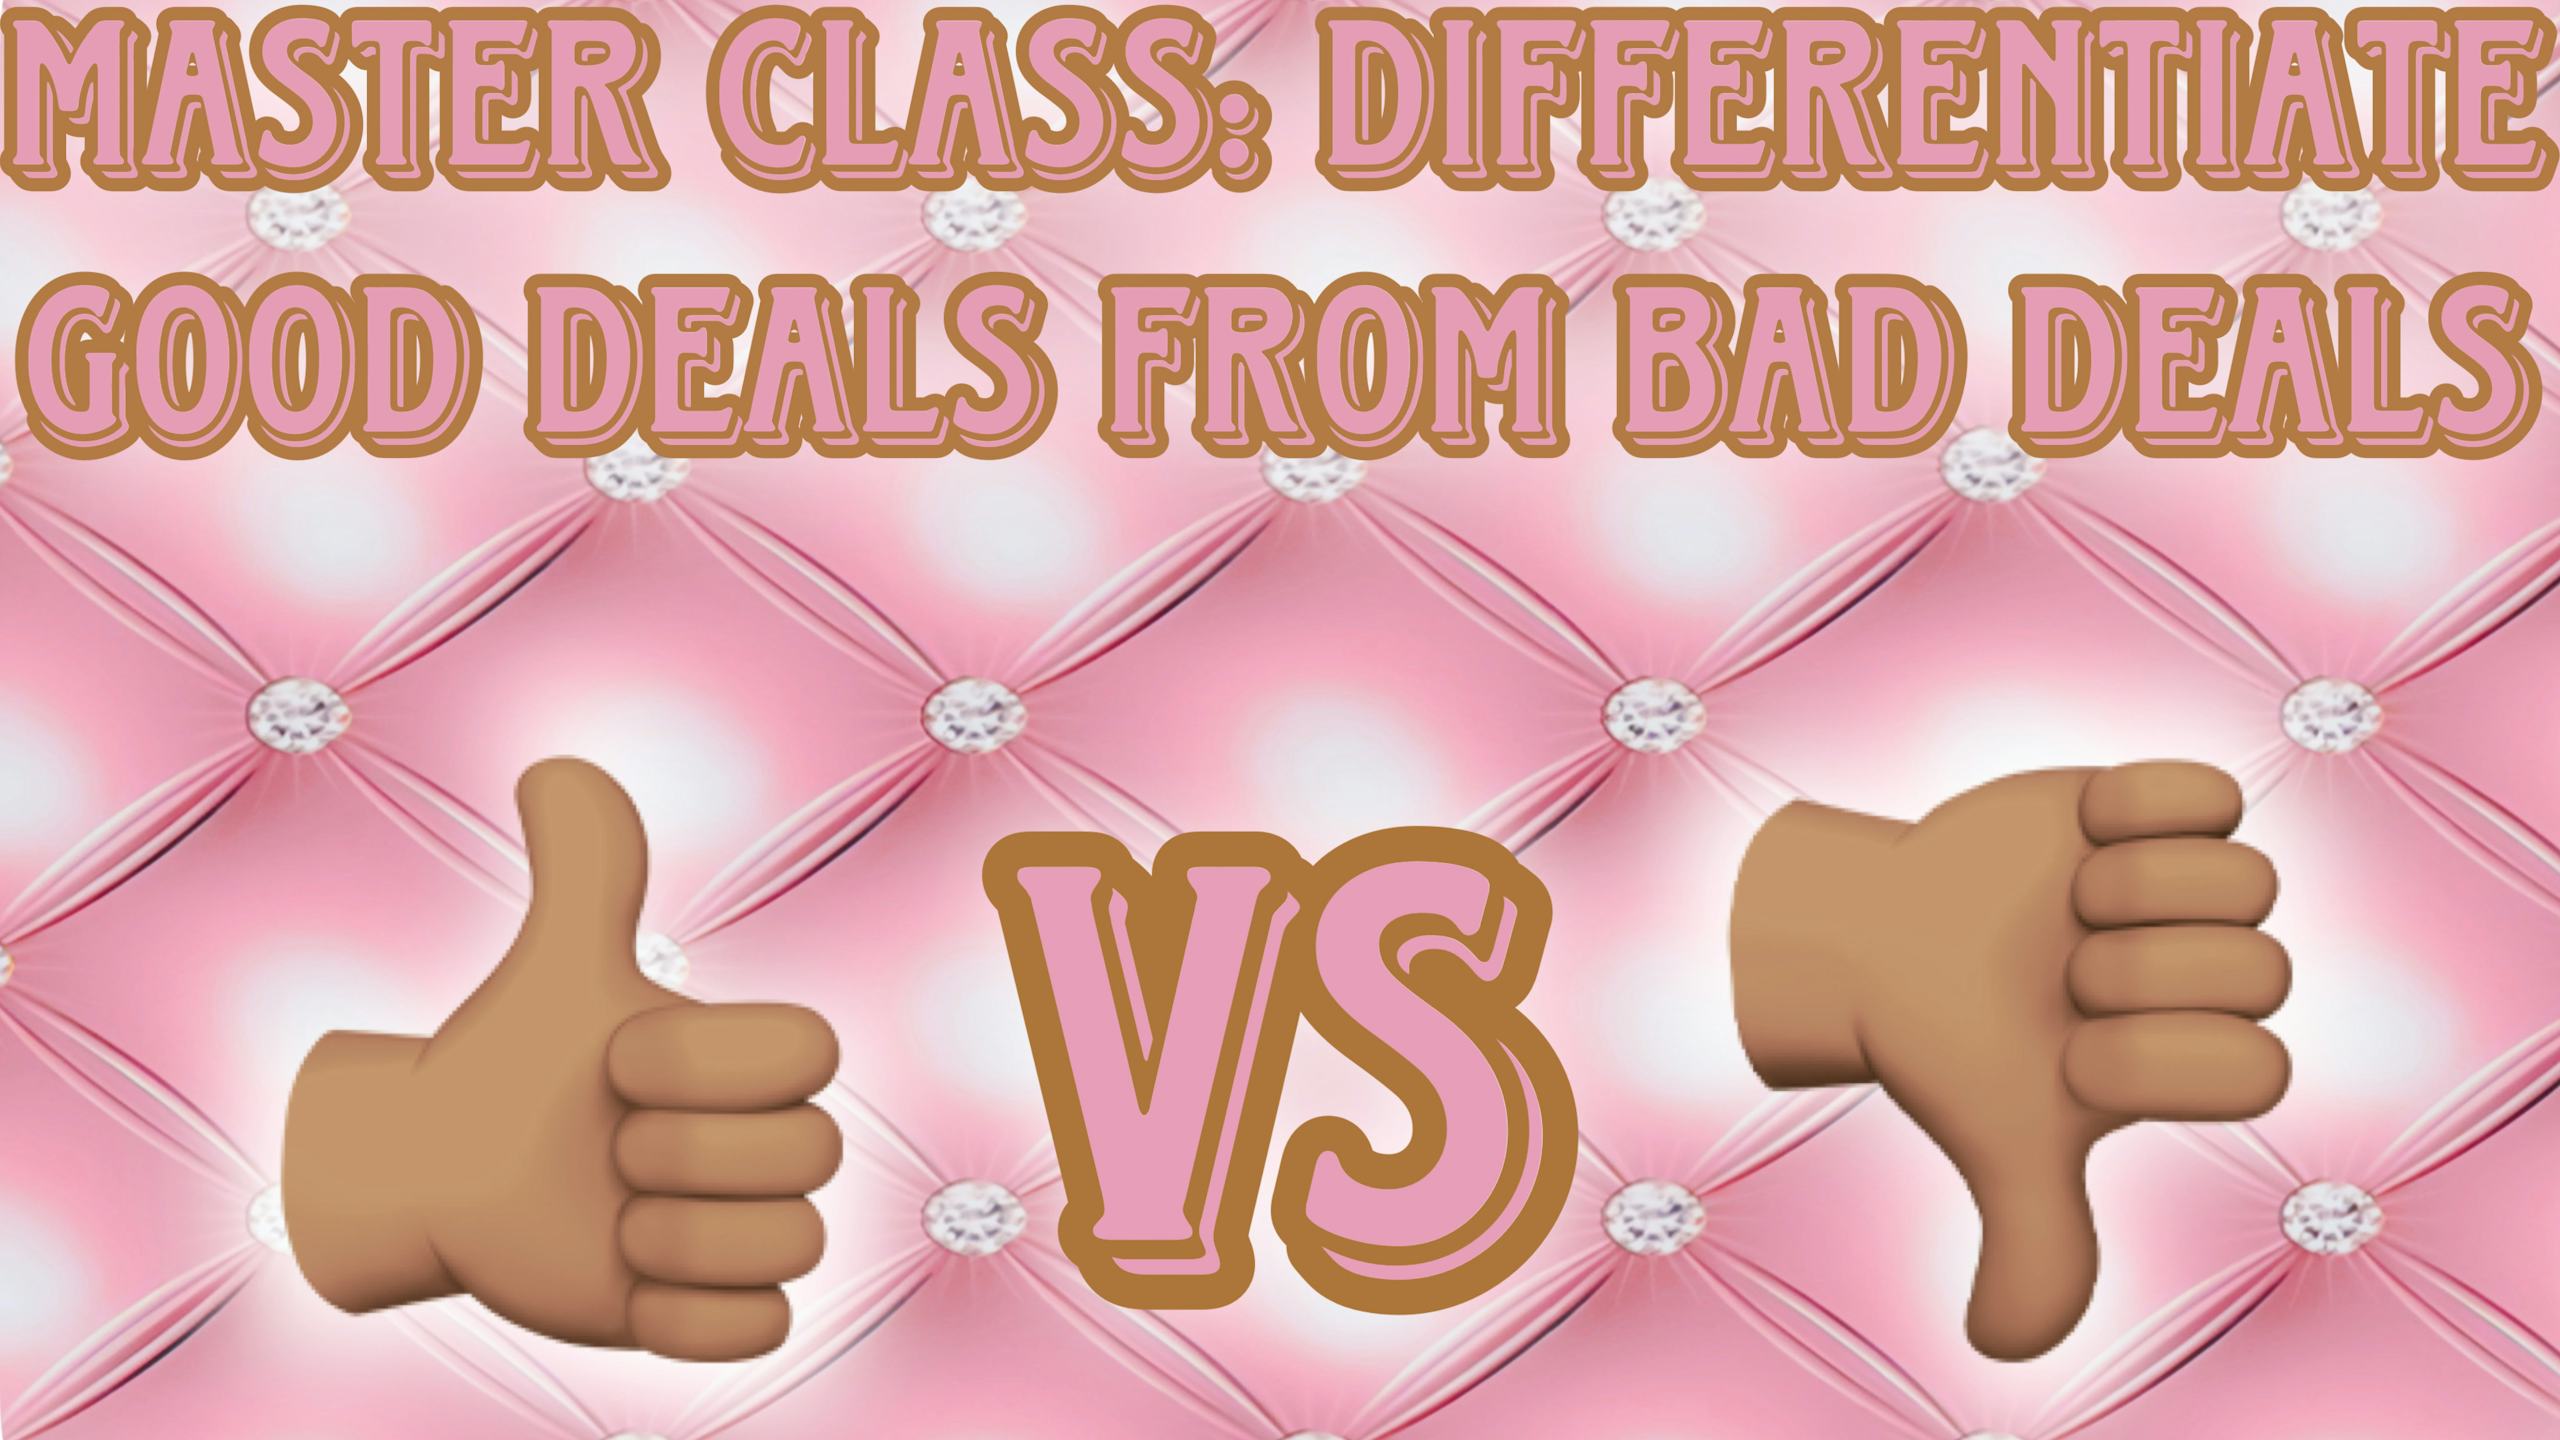 Learn The Difference Between Good Deals And Bad Deals So That You Can Set Yourself Up For Success